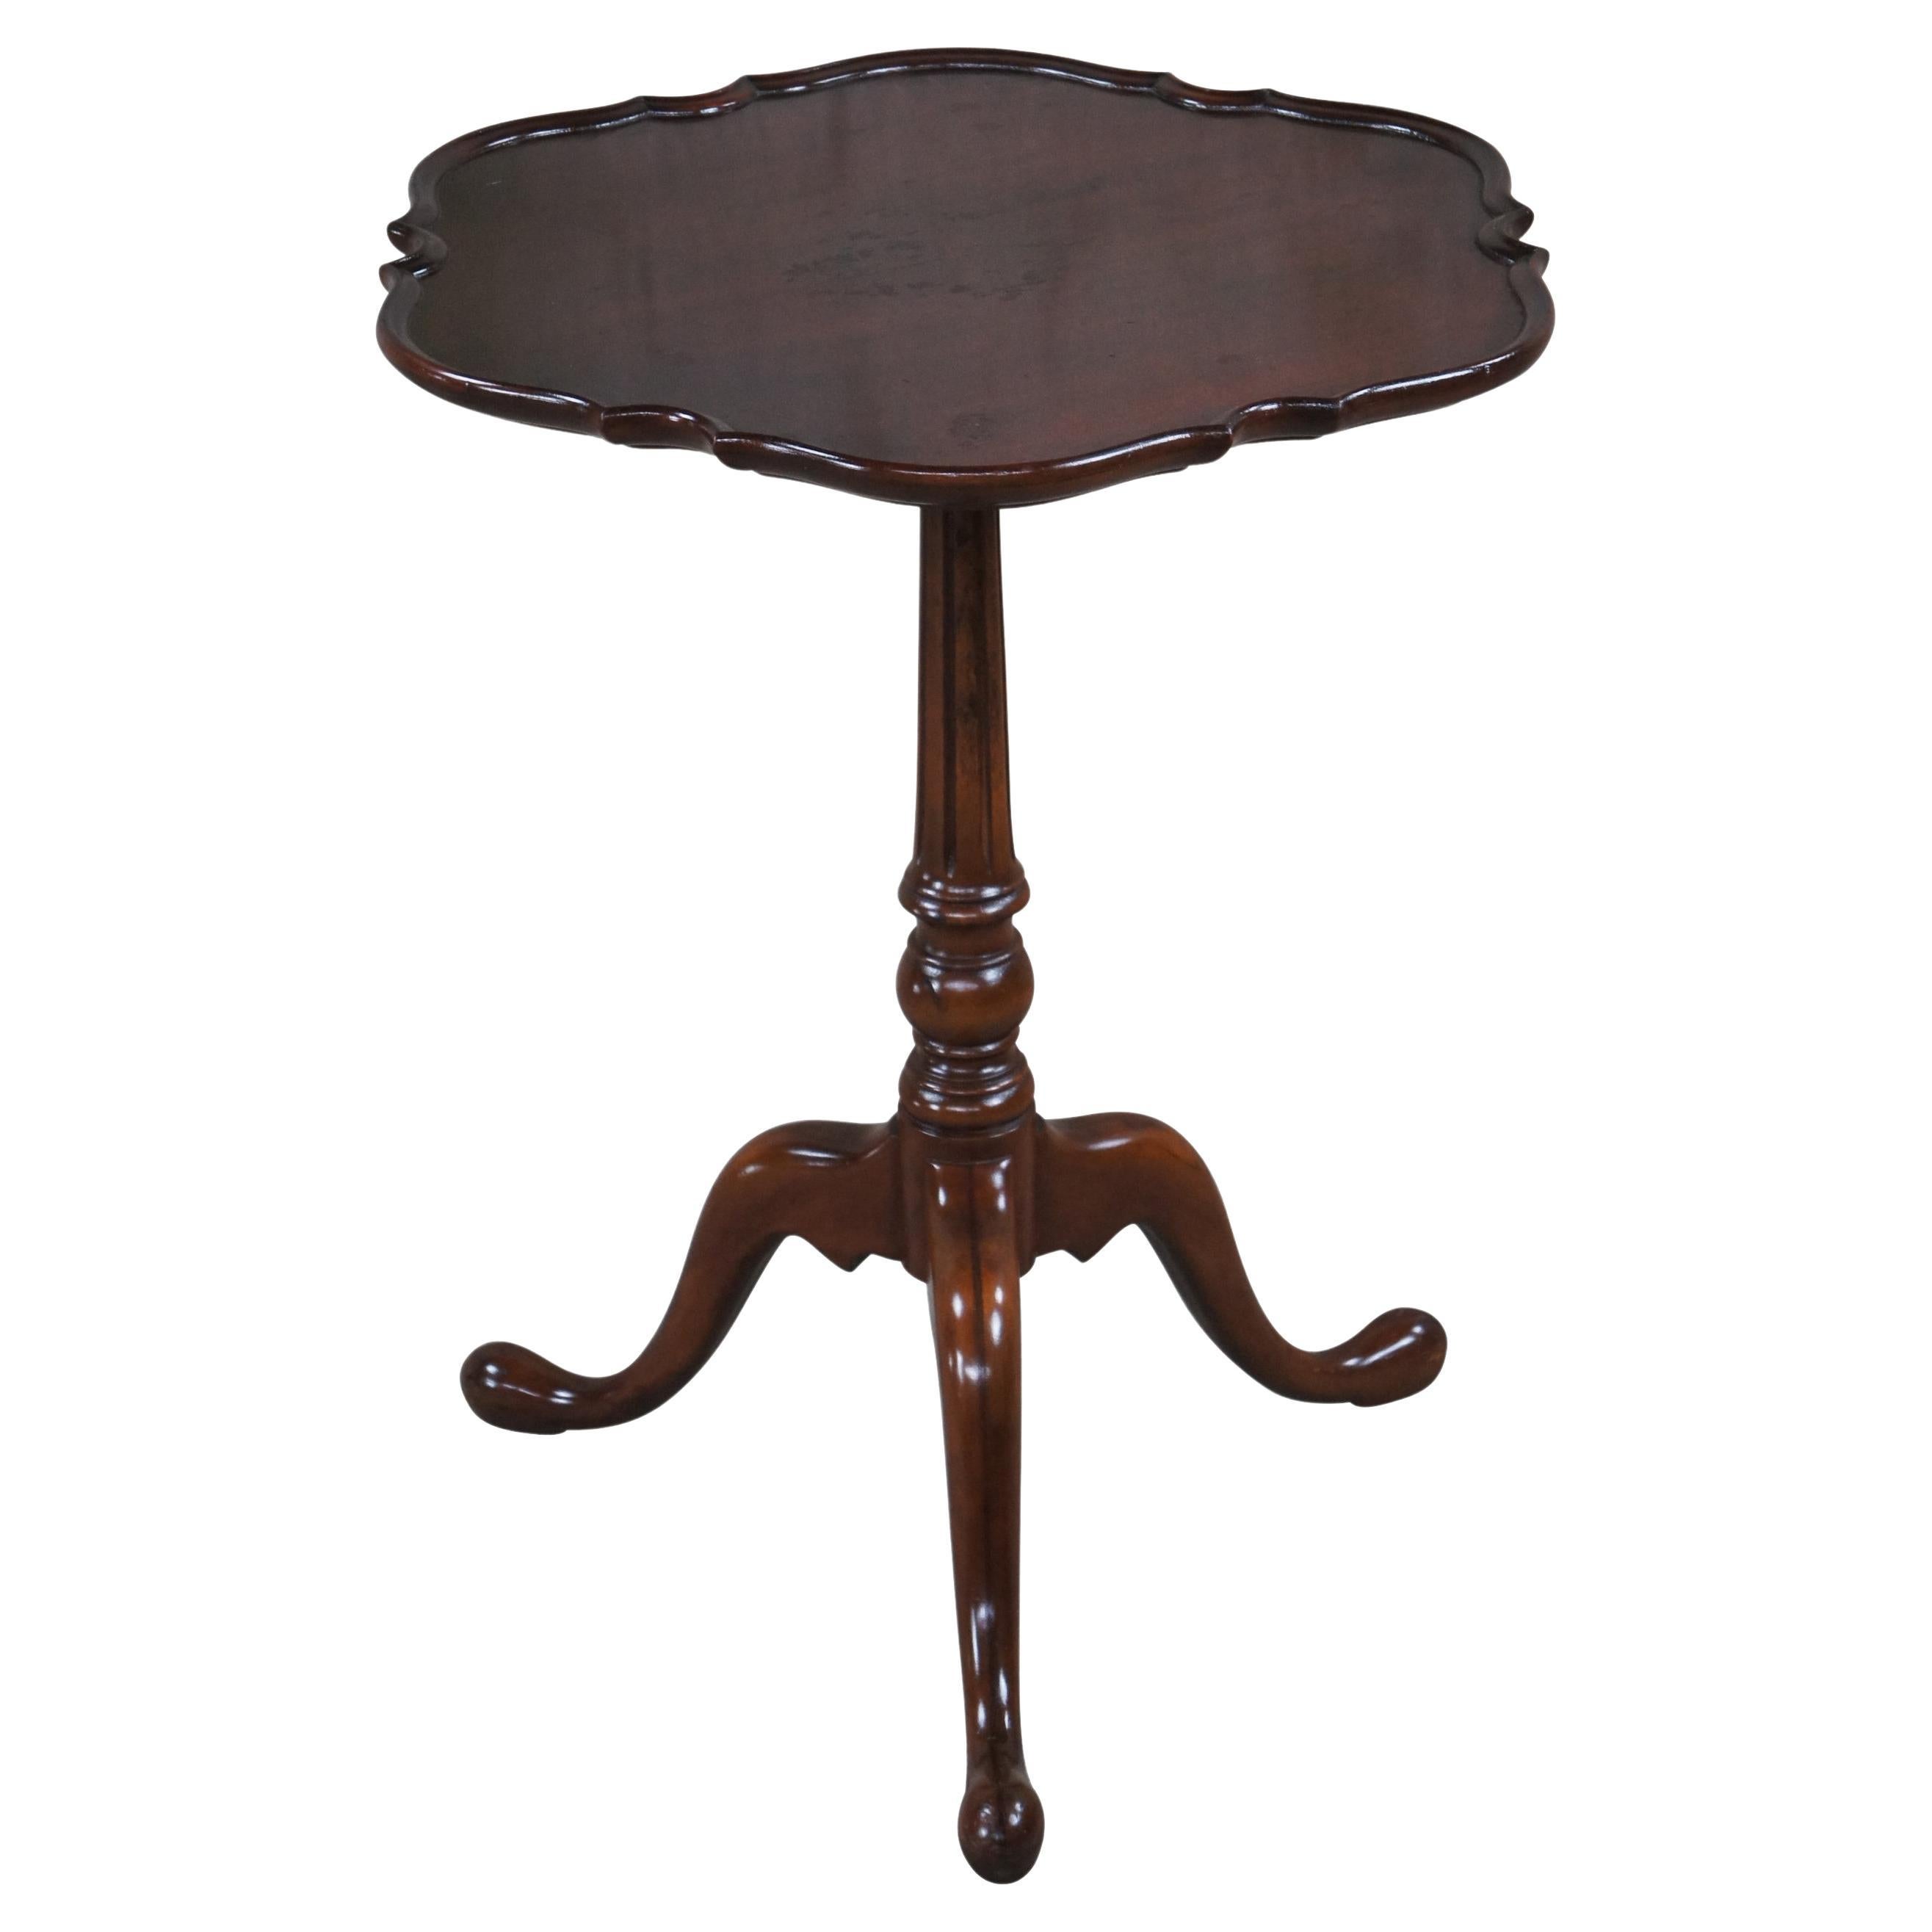 Antique Imperial Furniture Queen Anne Mahogany Pie Crust Pedestal Table Stand For Sale